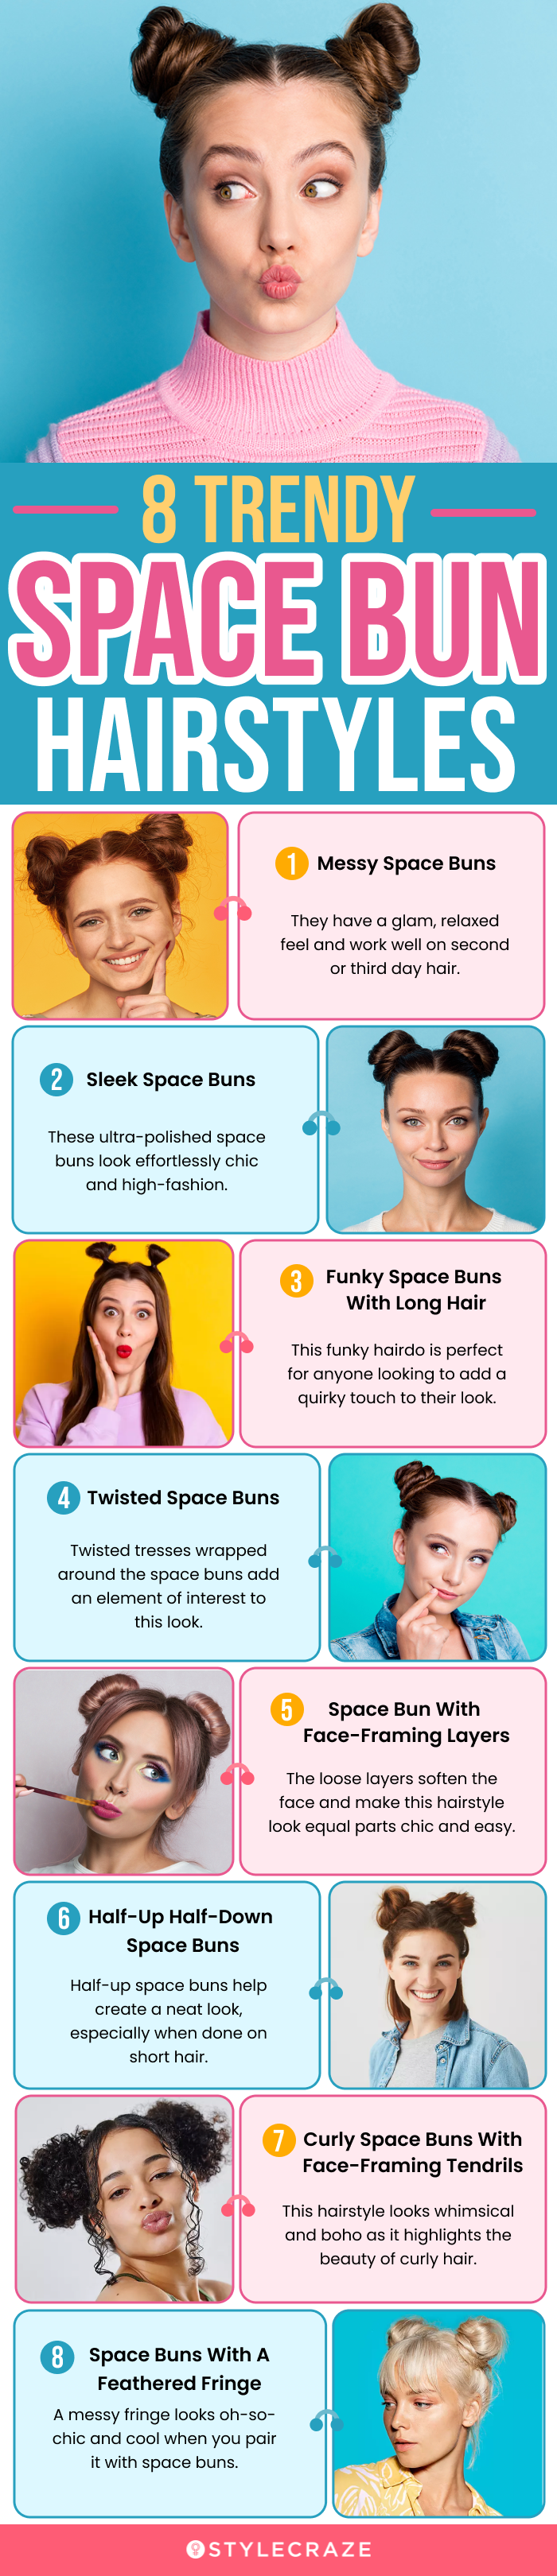 8 trendy space bun hairstyles (infographic)